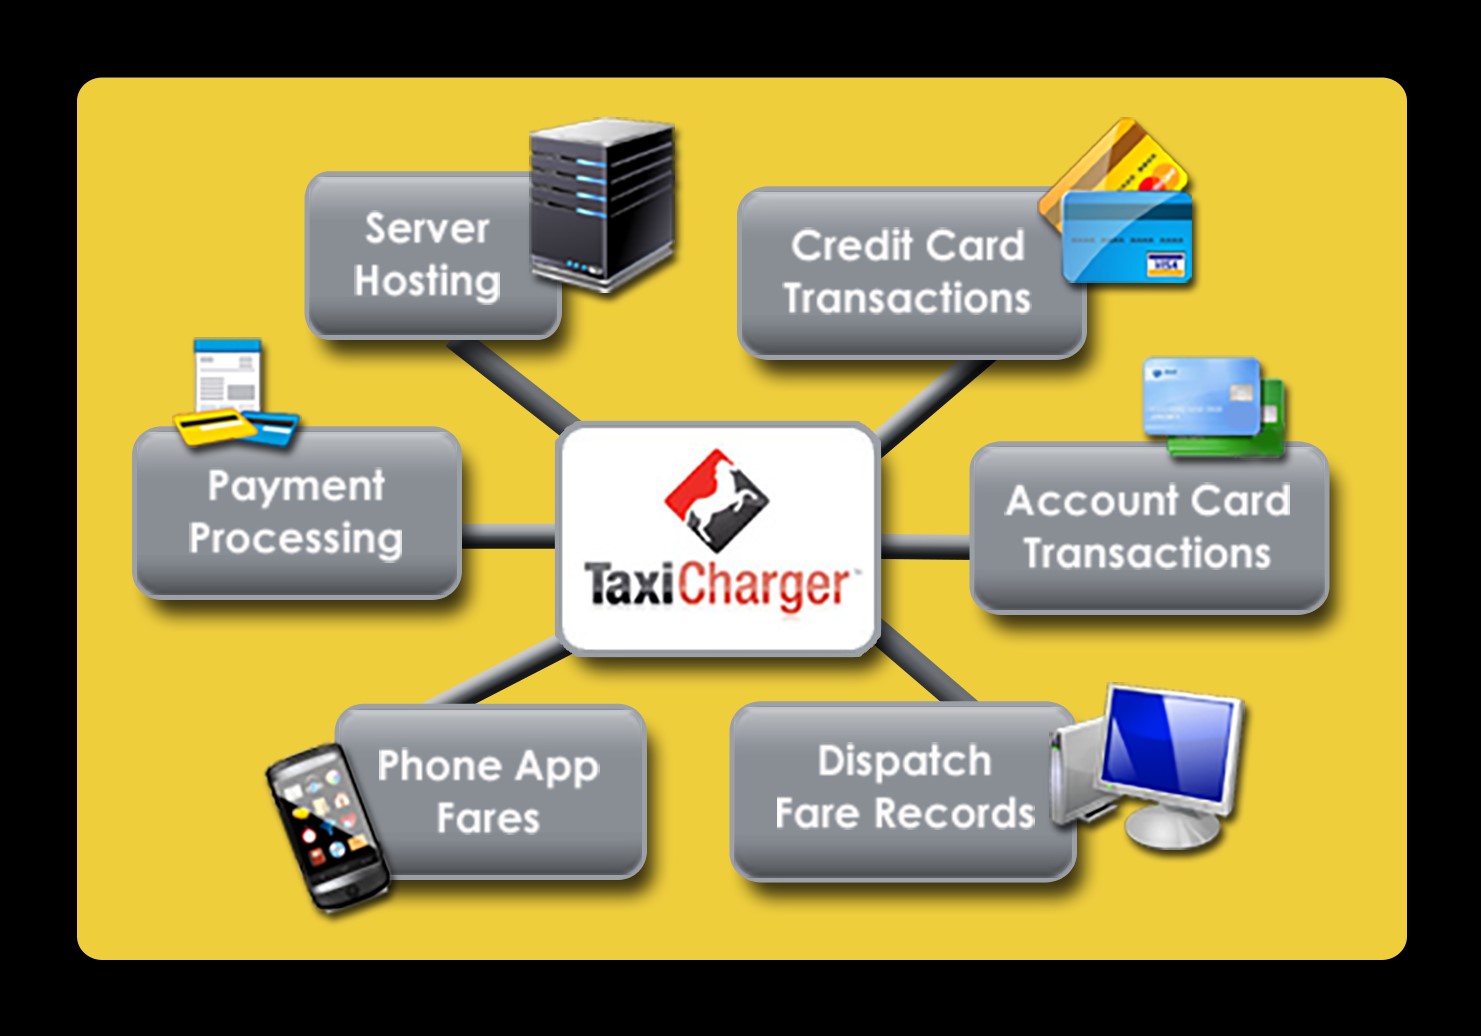 Taxi Charger is integrated with: Server Hosting, Payment Processing, Credit Card Transactions, Account Card Transactions, Dispatch Fare Records, Phone App Fares.